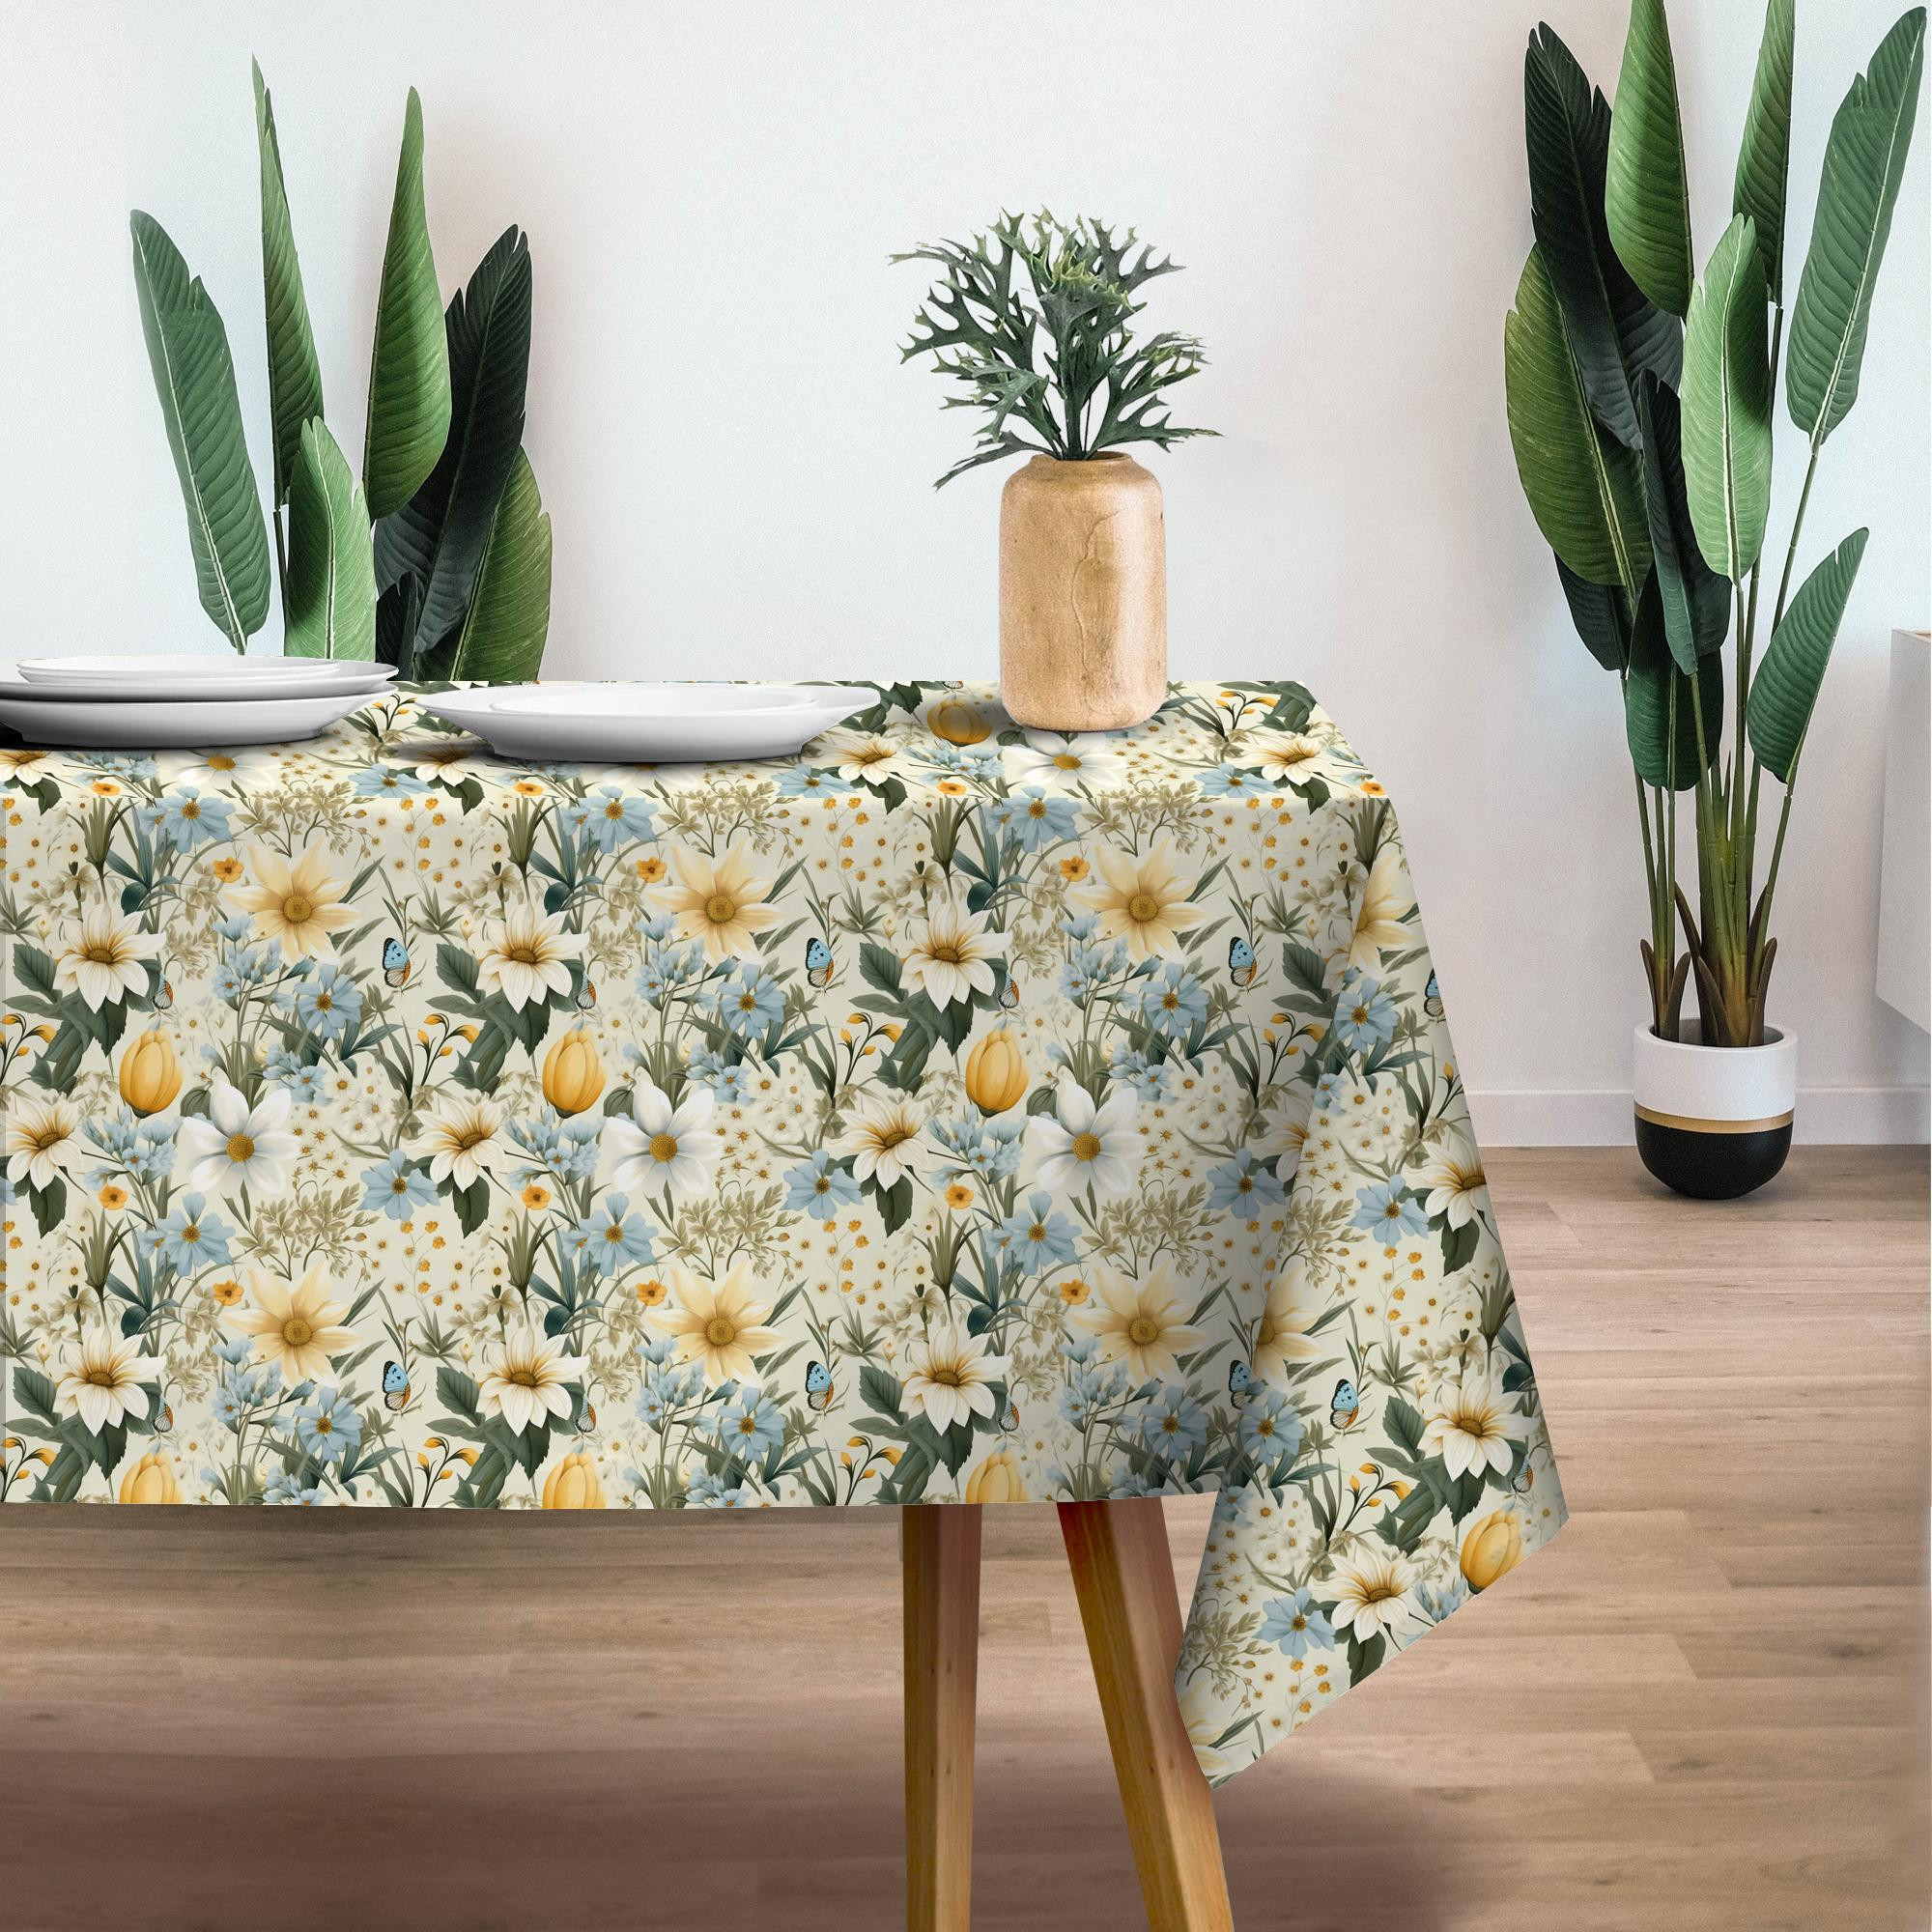 SPRING FLOWERS PAT. 3 - Woven Fabric for tablecloths